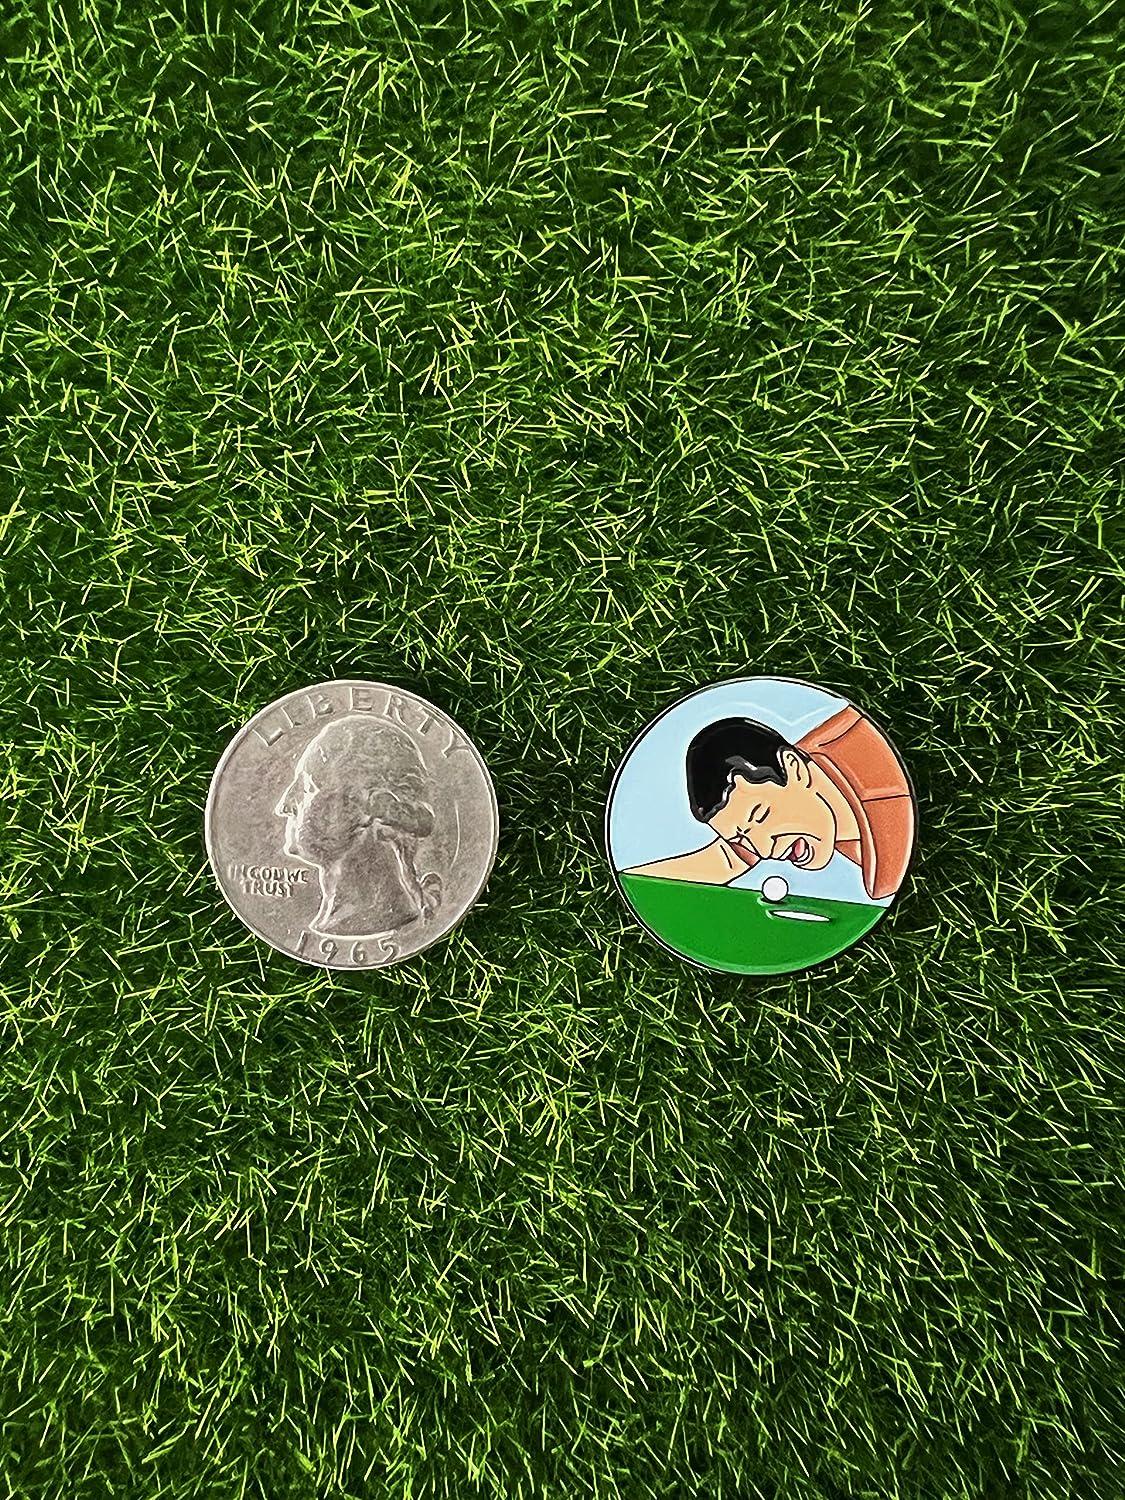 Happy Gilmore Golf Ball Marker With Magnetic Hat Clip Perfect 